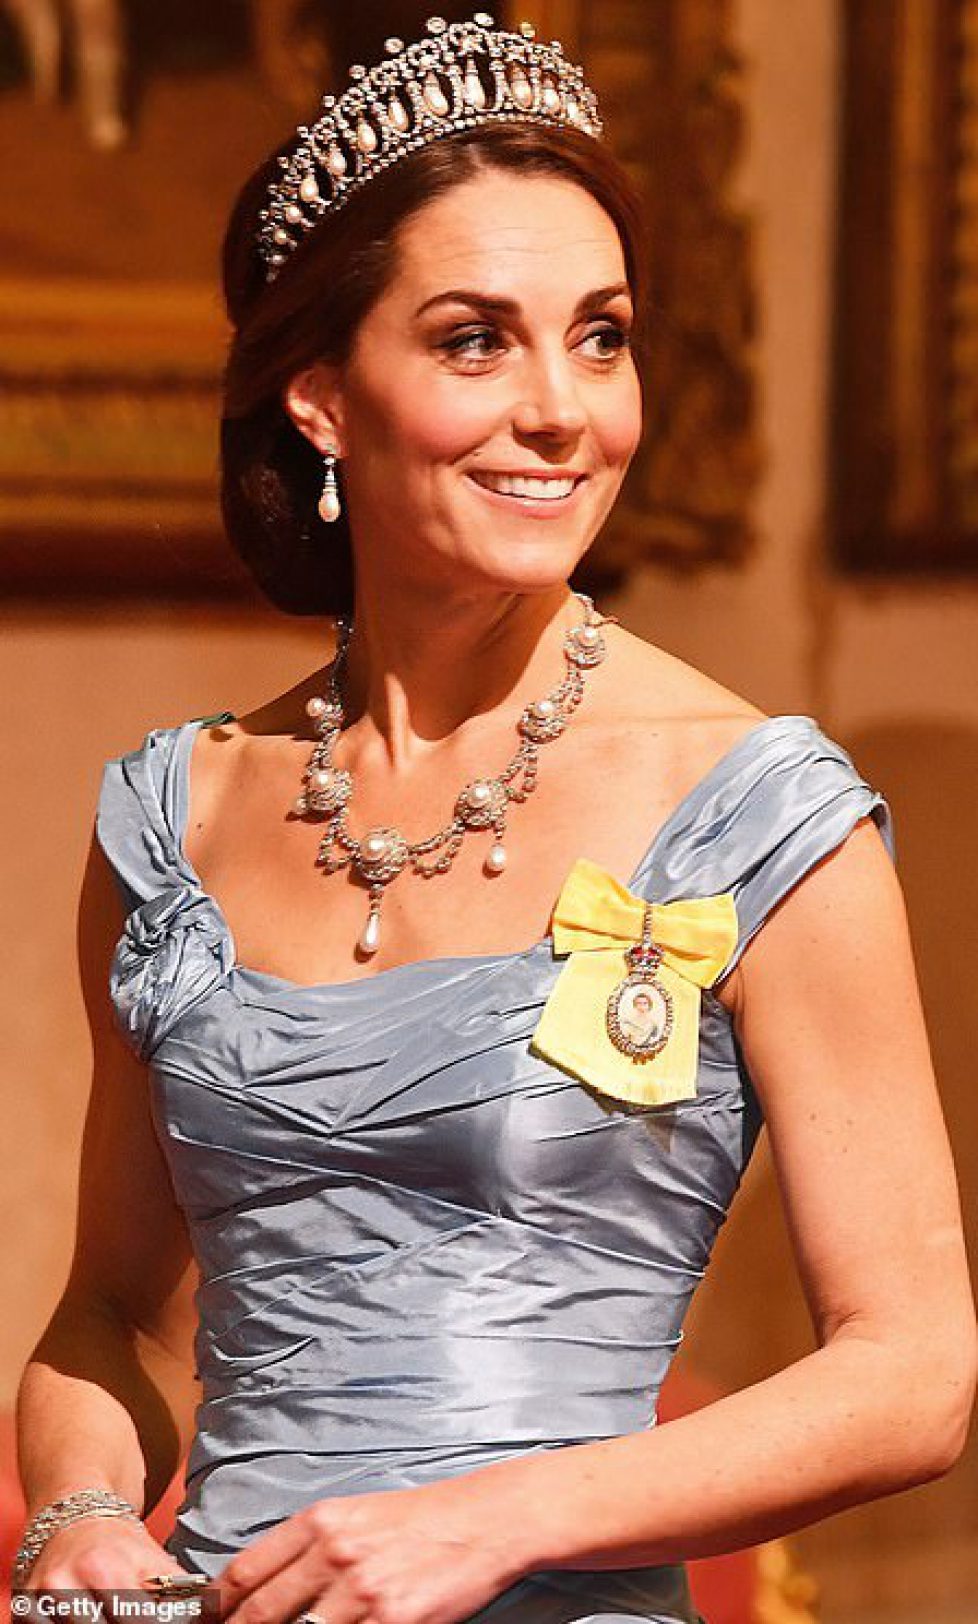 The-Duchess-of-Cambridge-most-recently-wore-the-Lovers-Knot-Tiara-to-the-state-banquet-held-in-honour-of-Queen-Maxima